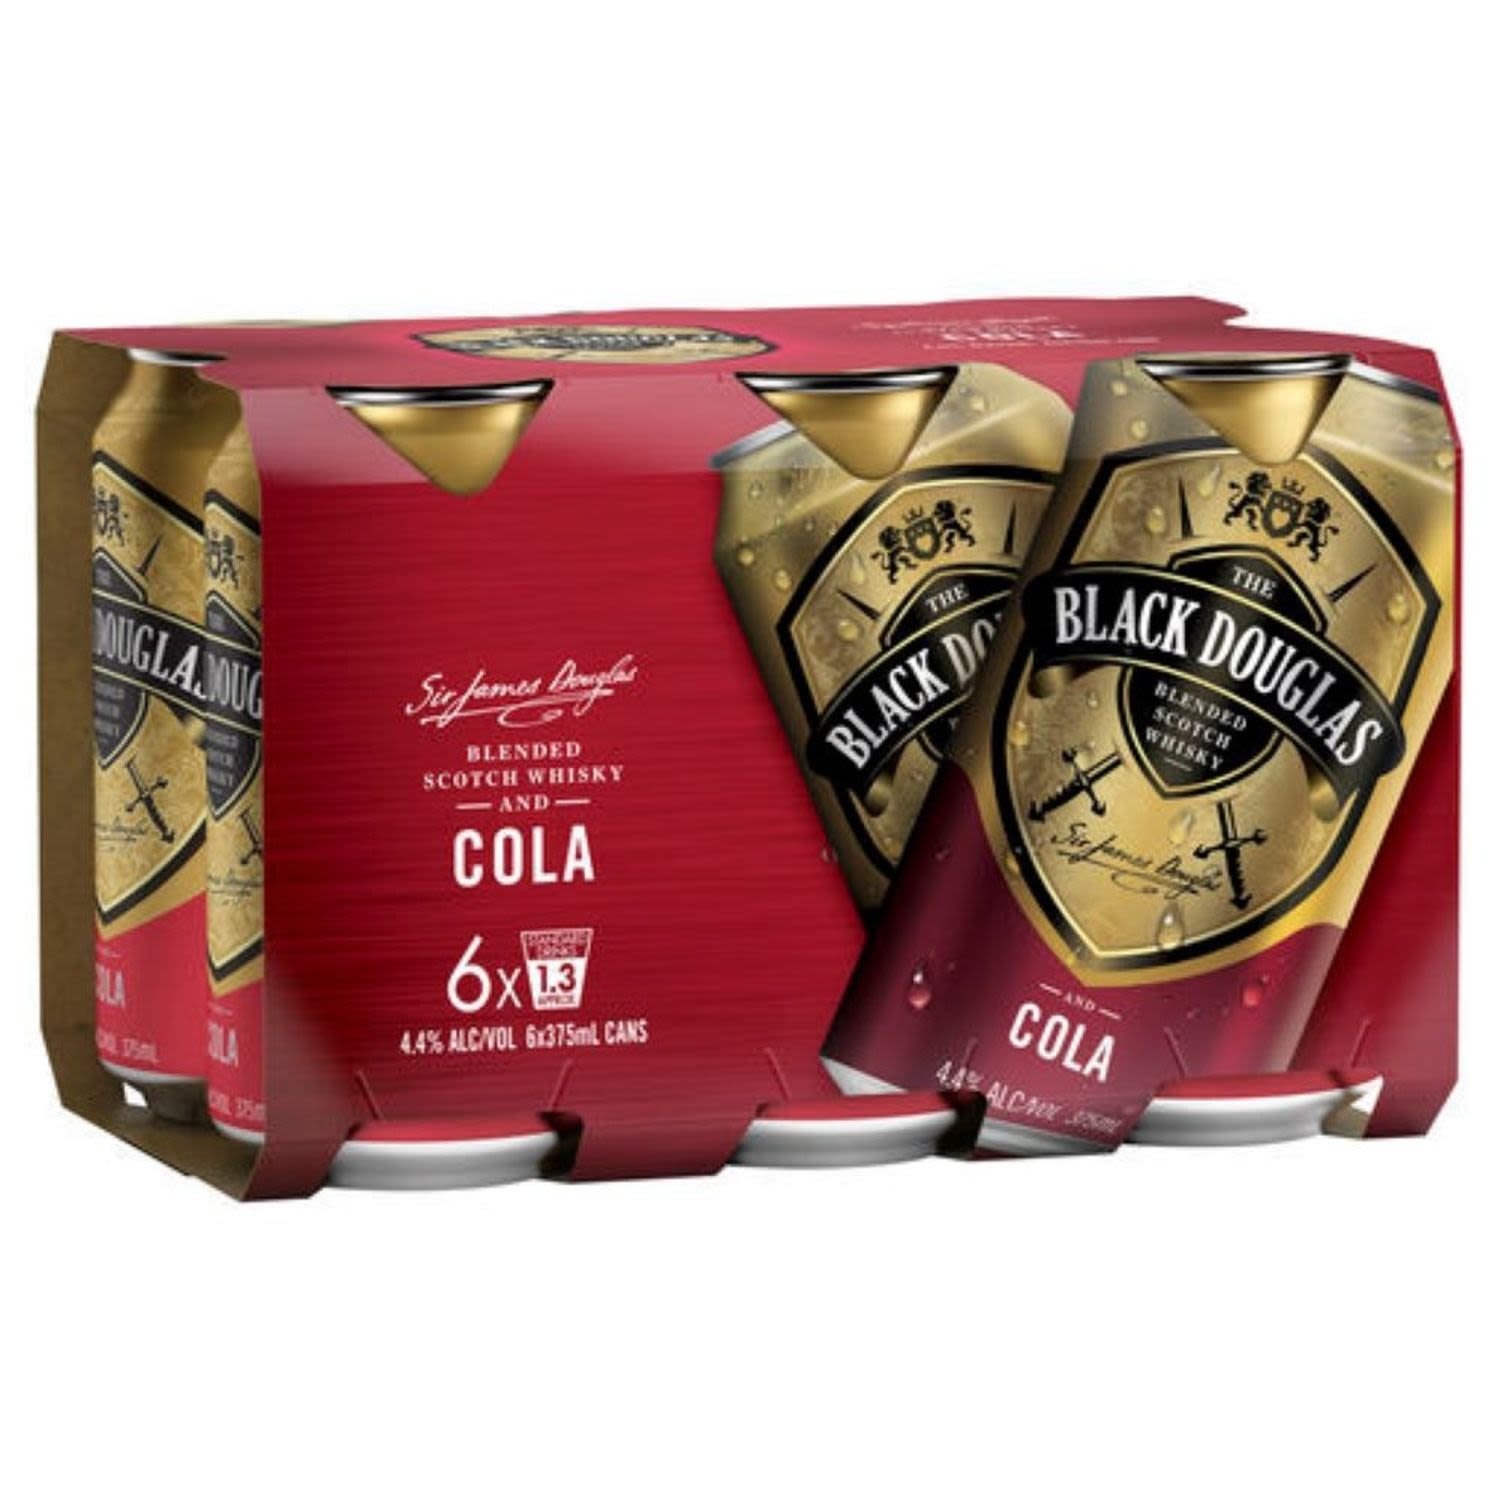 Black Douglas Whisky & Cola 4.4% Can 375mL 6 Pack